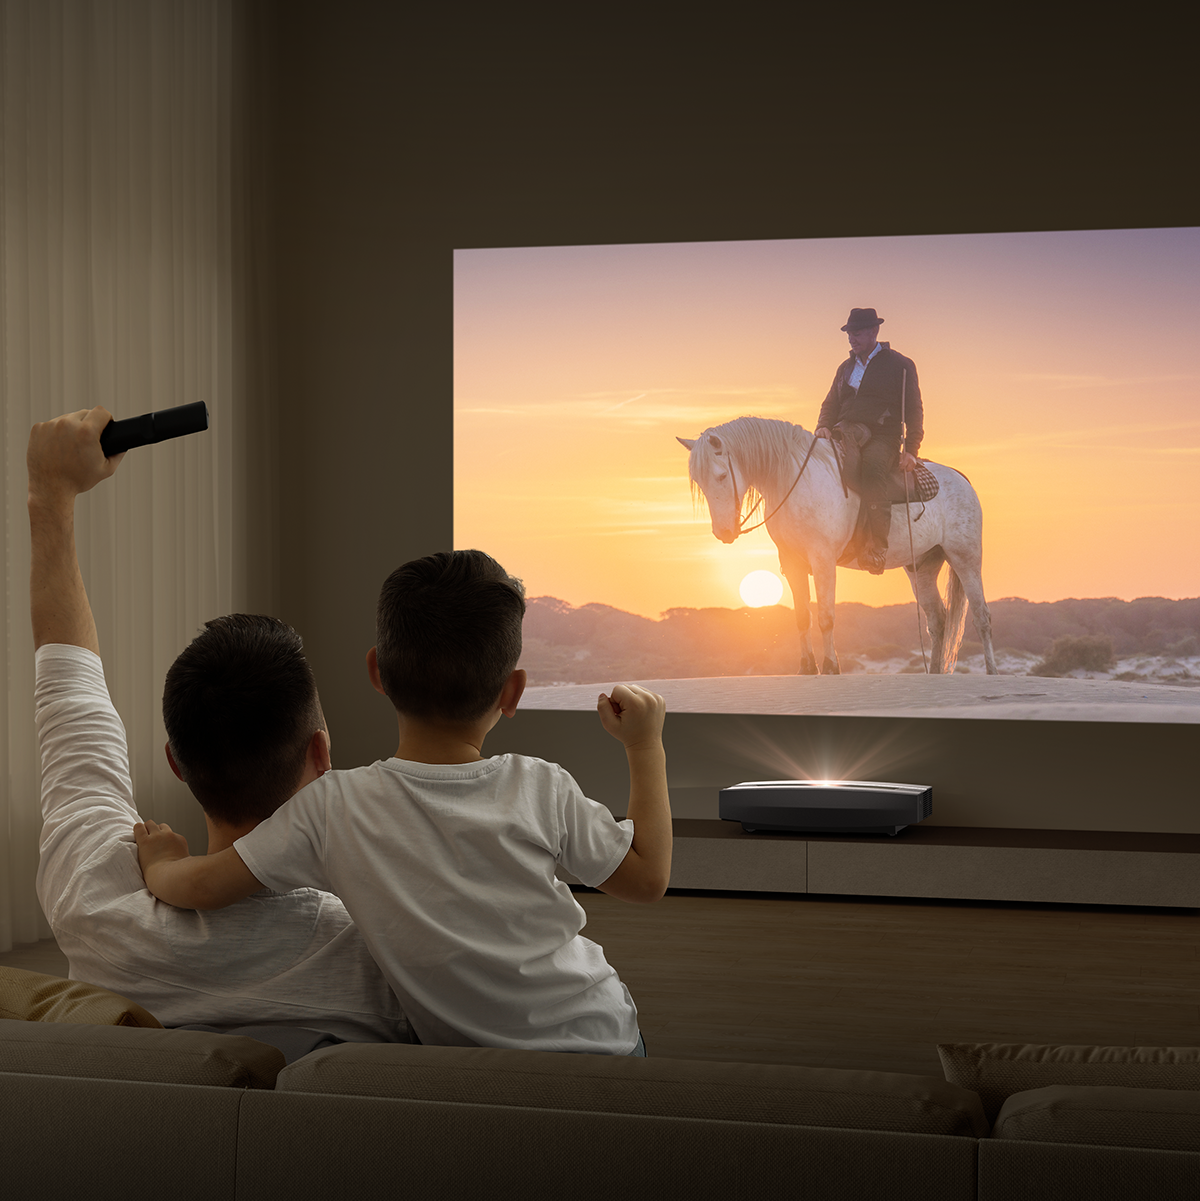 Enjoy Exciting Movie Nights At Home With Smart Projectors